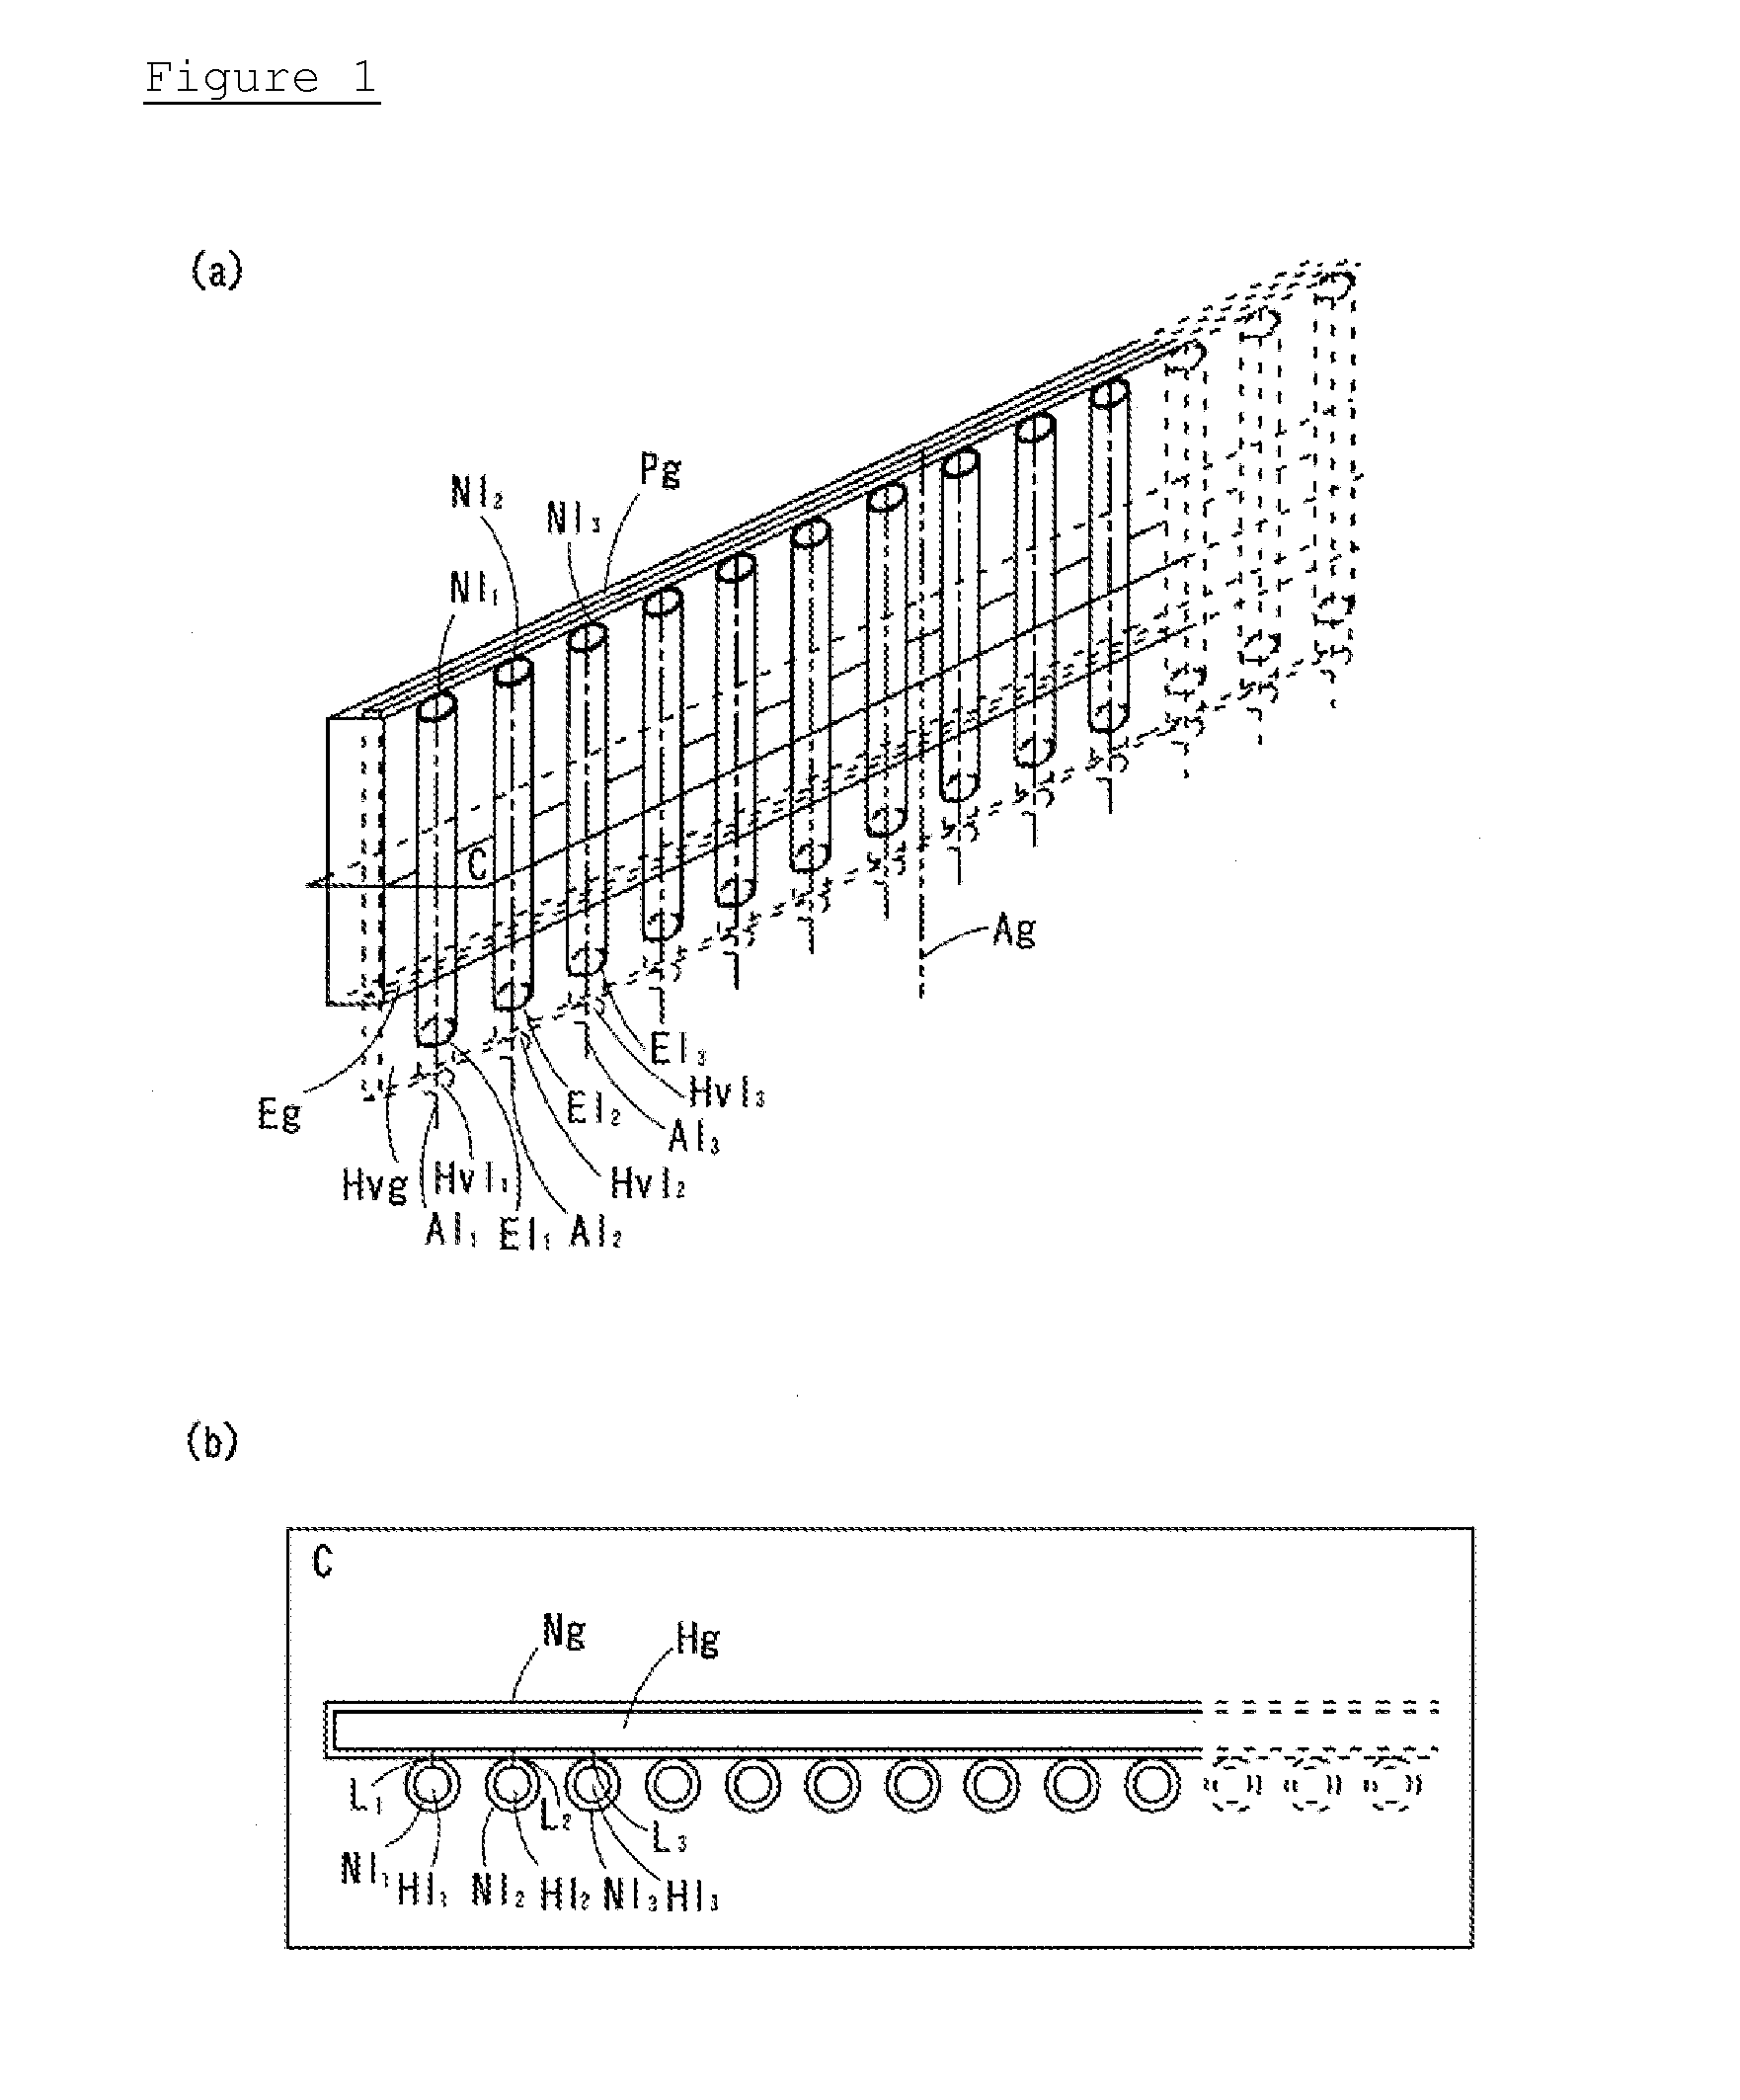 Spinning apparatus, apparatus and process for manufacturing nonwoven fabric, and nonwoven fabric